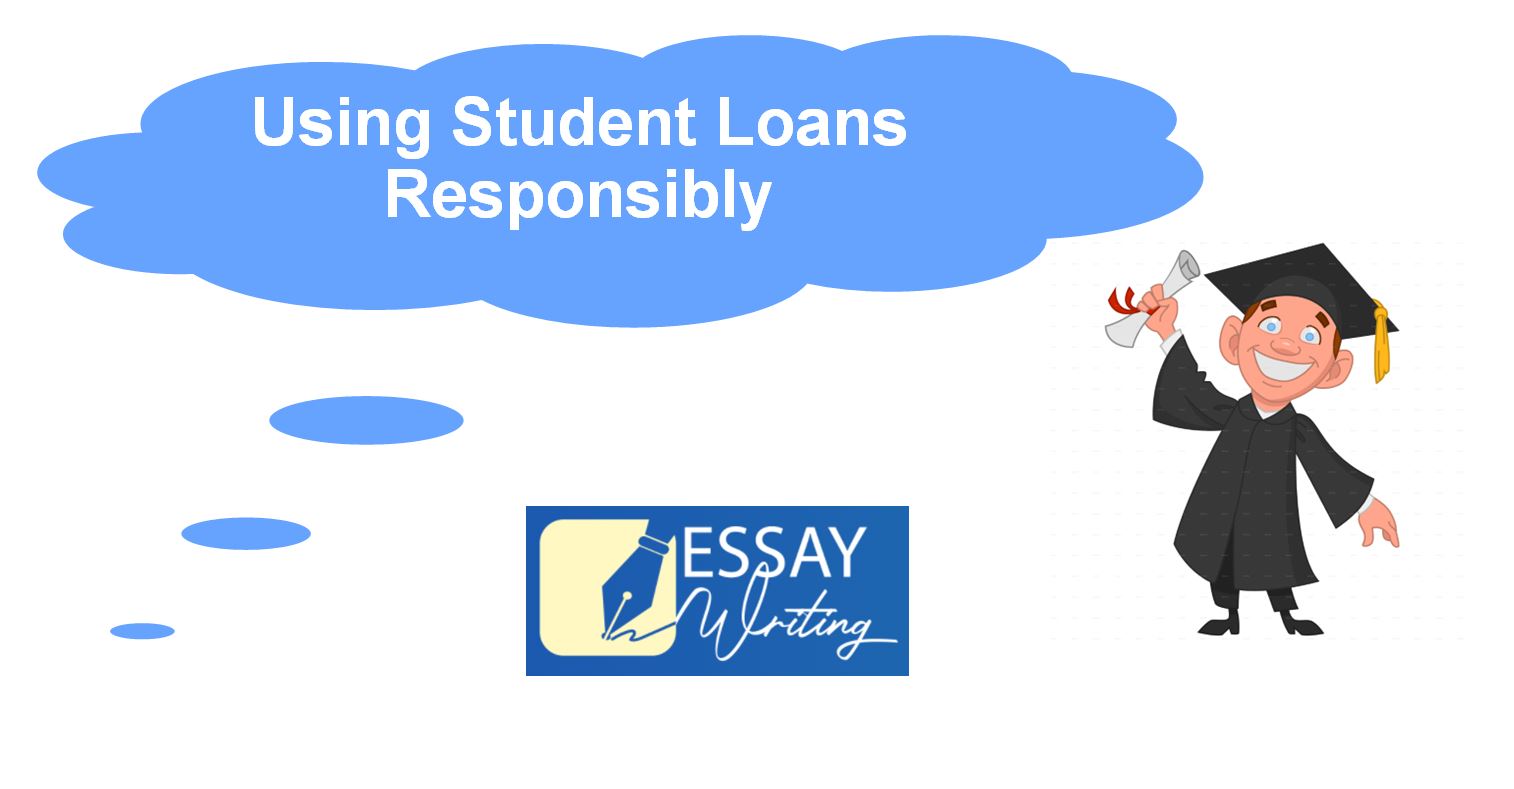 How to Use Student loans responsibly